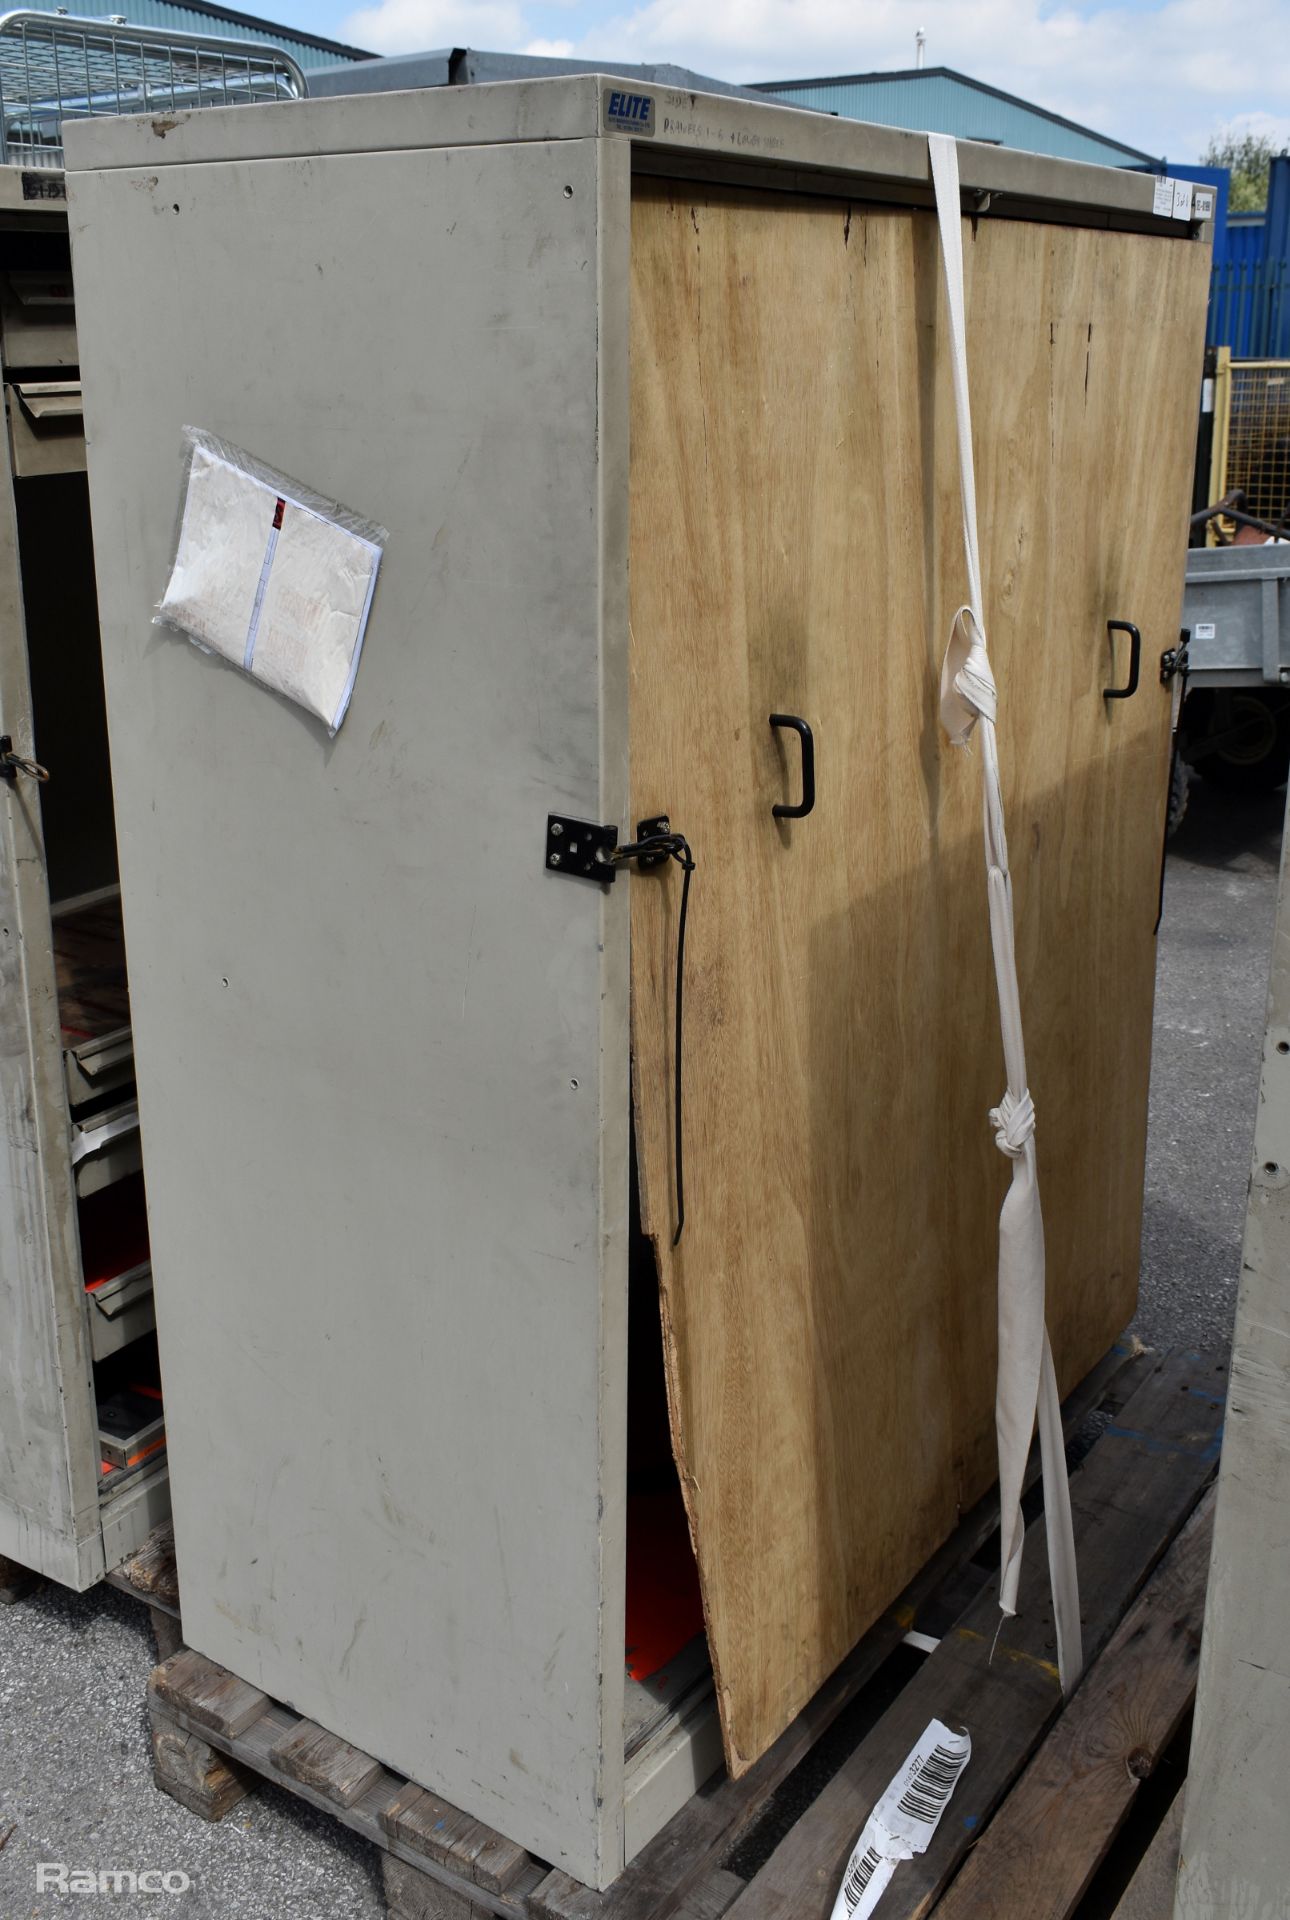 4x Elite mobile maintenance tool cabinet - L 1250 x W 550 x H 1650mm - SPARES OR REPAIRS - Image 6 of 9